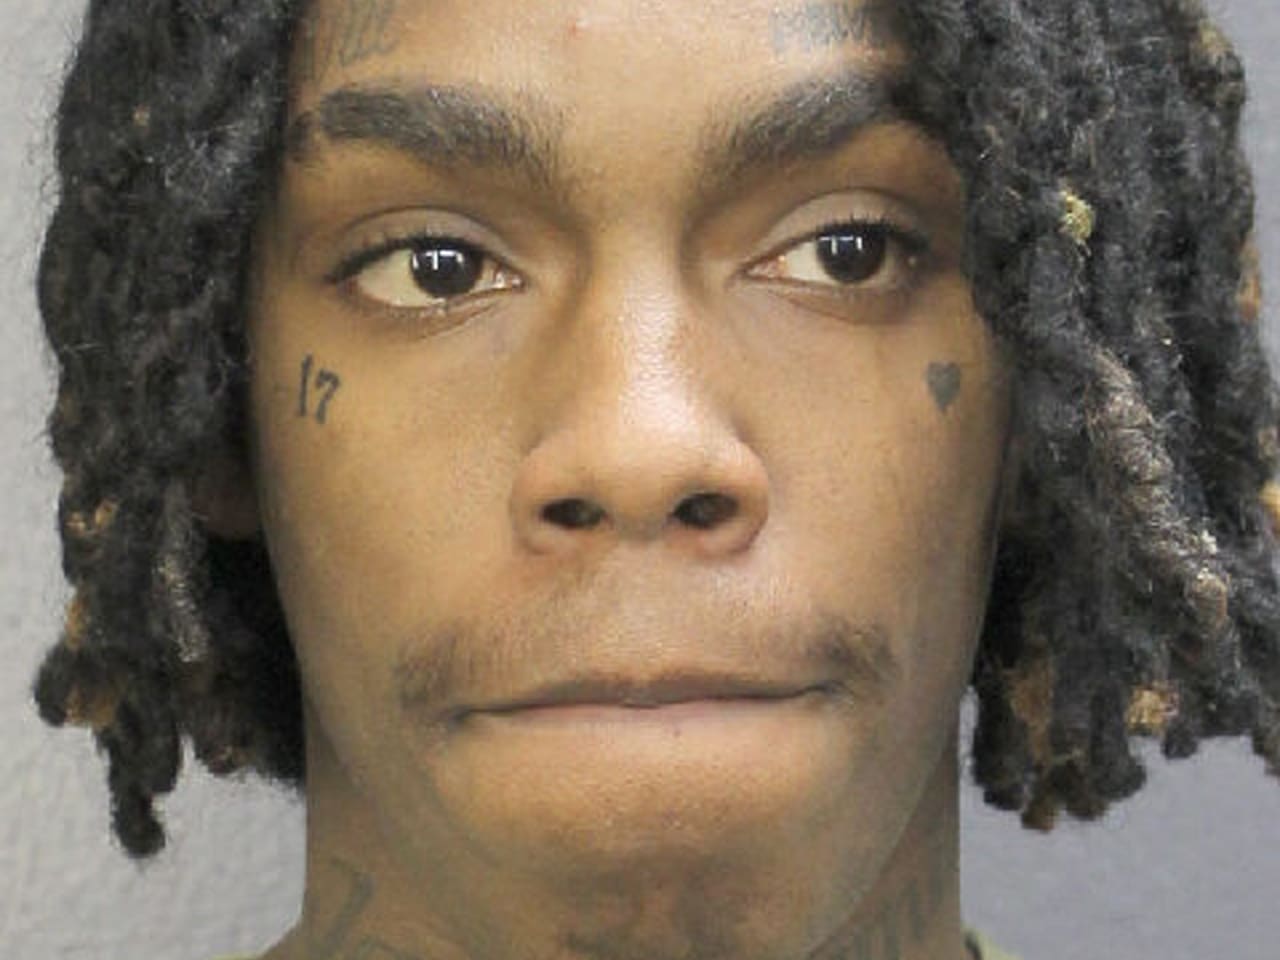 Ynw Melly A Timeline Of His Legal Situation And Murder Arrest Complex - murder on my mind roblox song id unclean